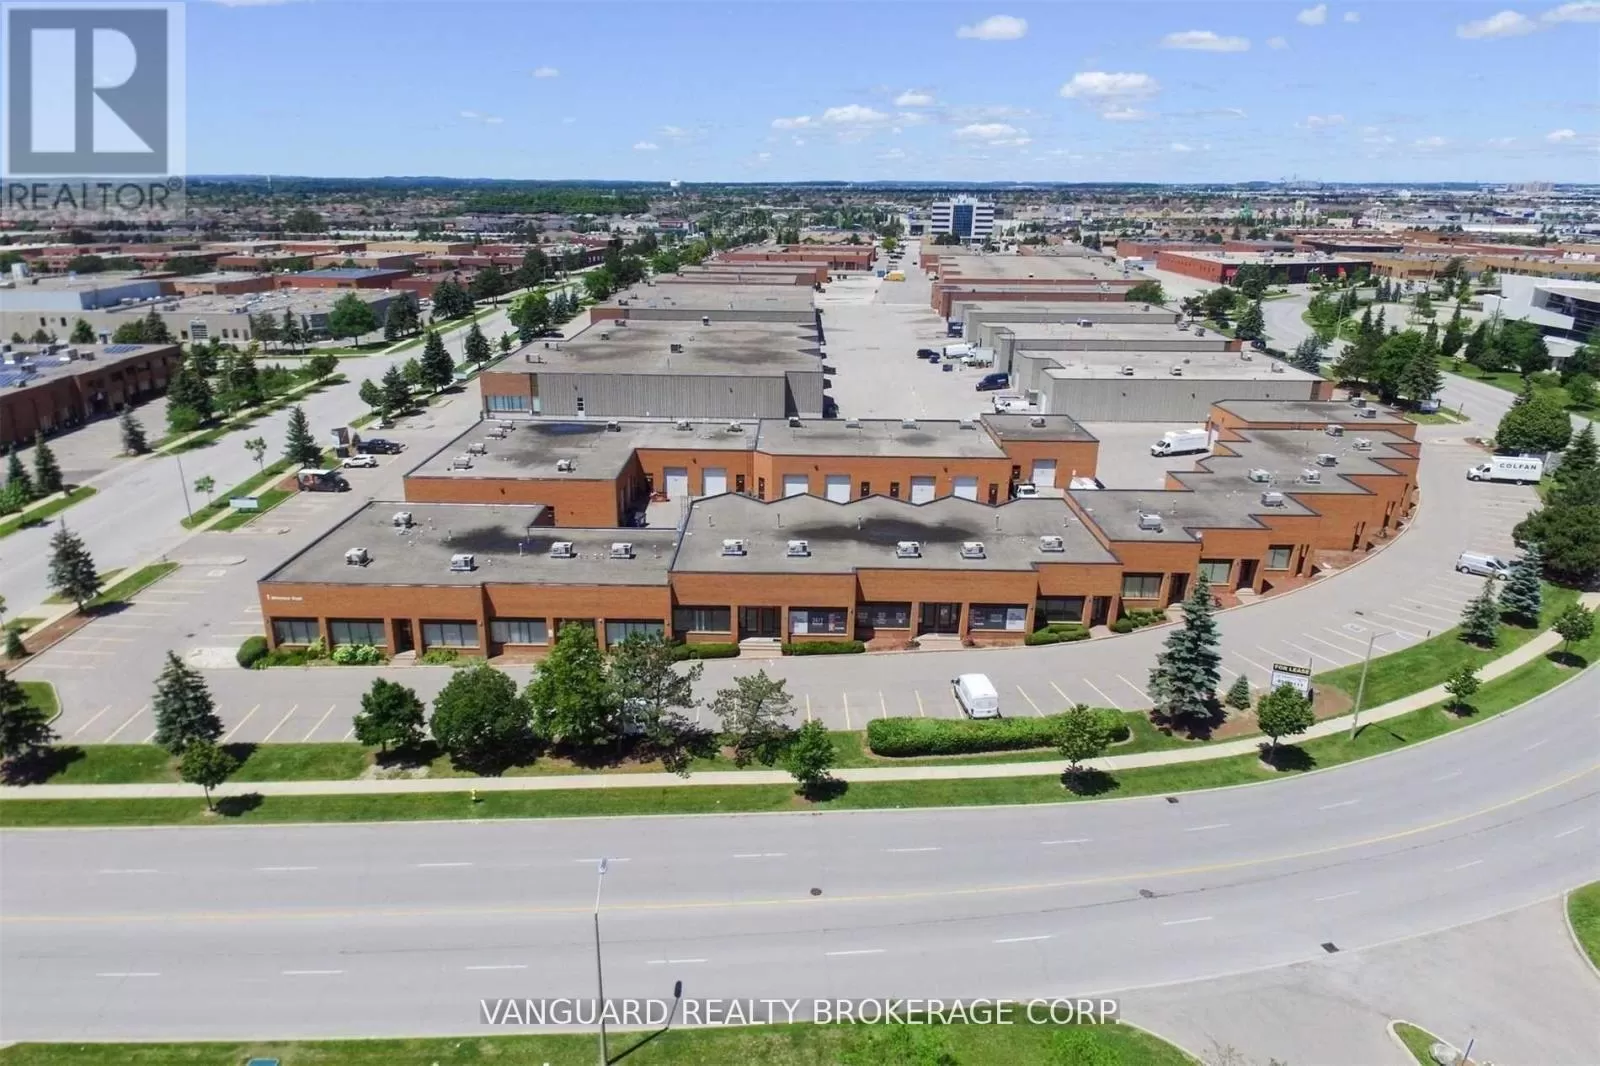 Multi-Tenant Industrial for rent: 18 - 1 Whitmore Road, Vaughan, Ontario L4L 6A5